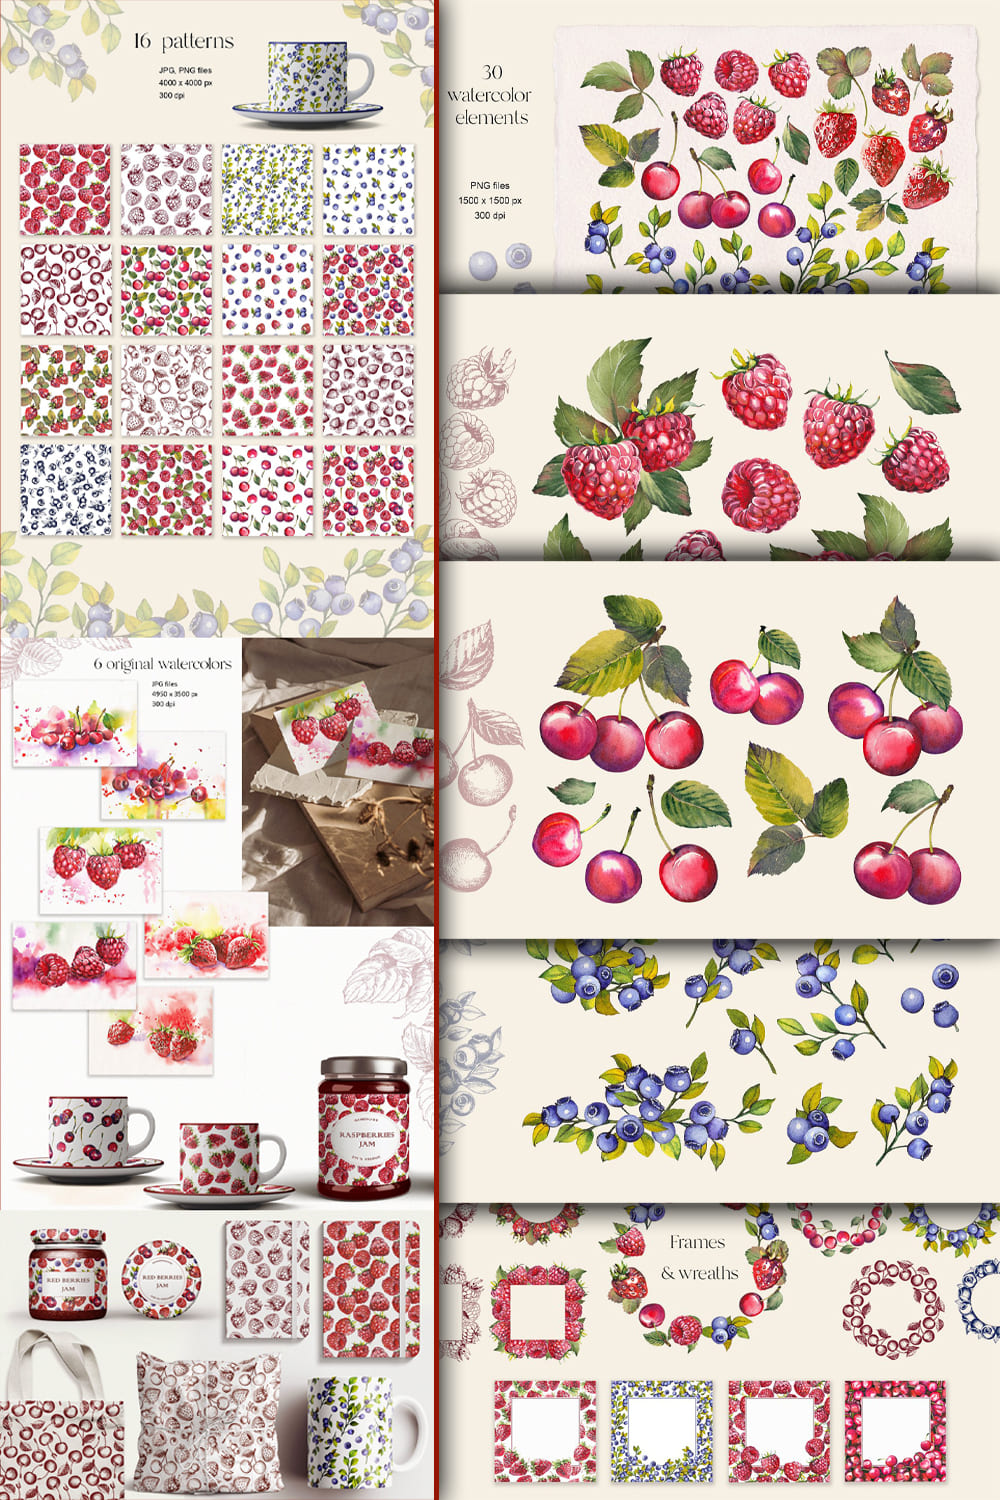 Cups, jars, bags with a berry print.